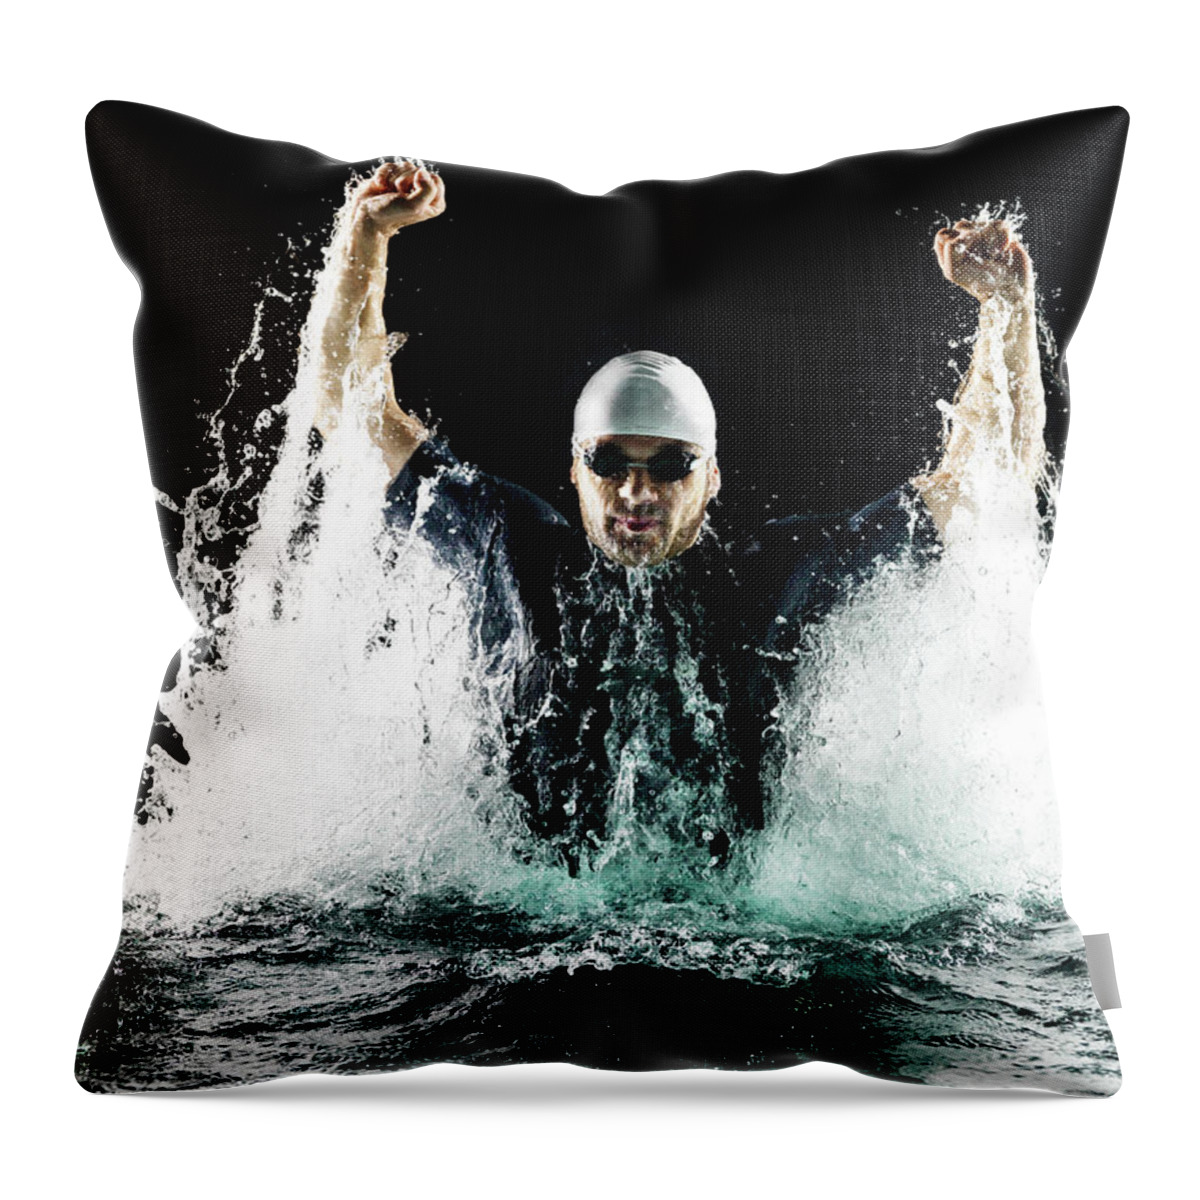 Human Arm Throw Pillow featuring the photograph Male Swimmer In Spray Of Water by Henrik Sorensen